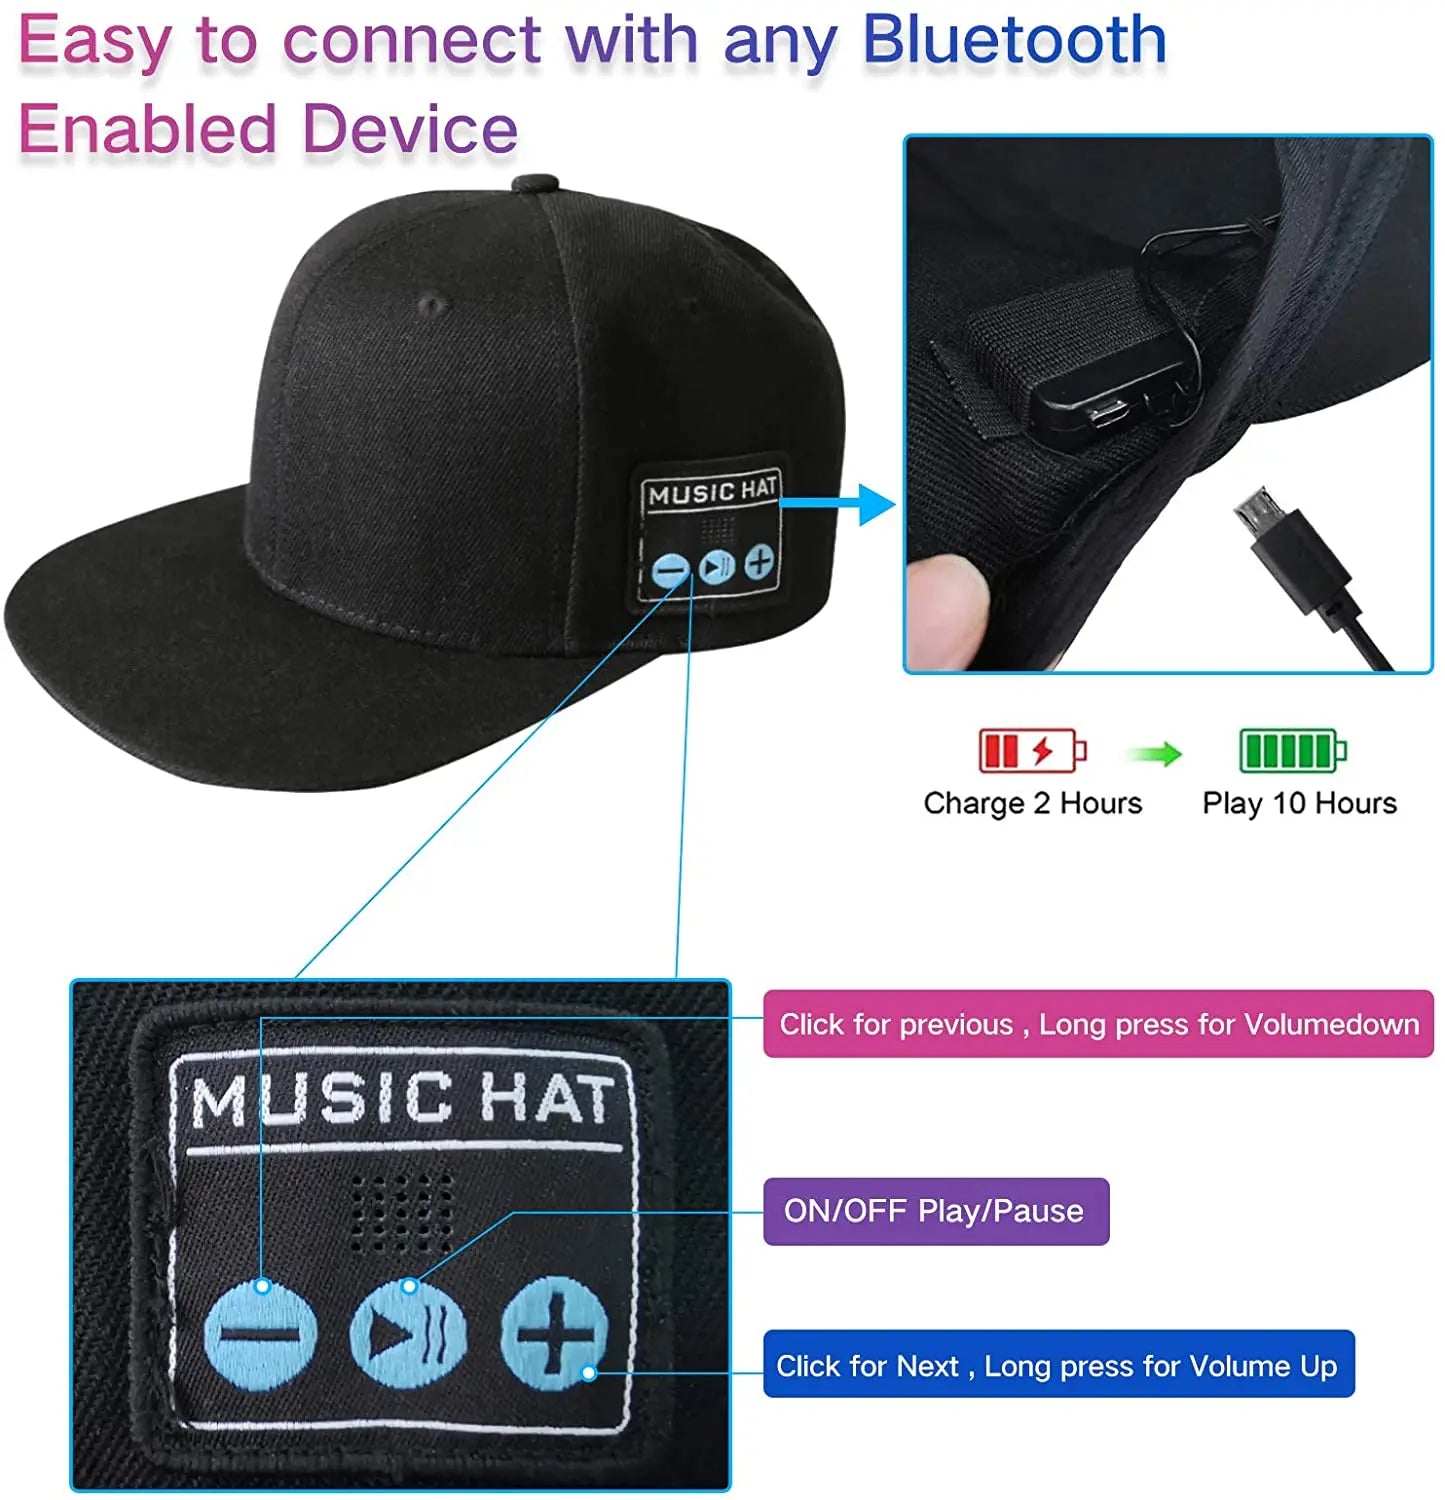 The black cap is displayed with icons showing its features: long battery life, Bluetooth connectivity, and music control buttons